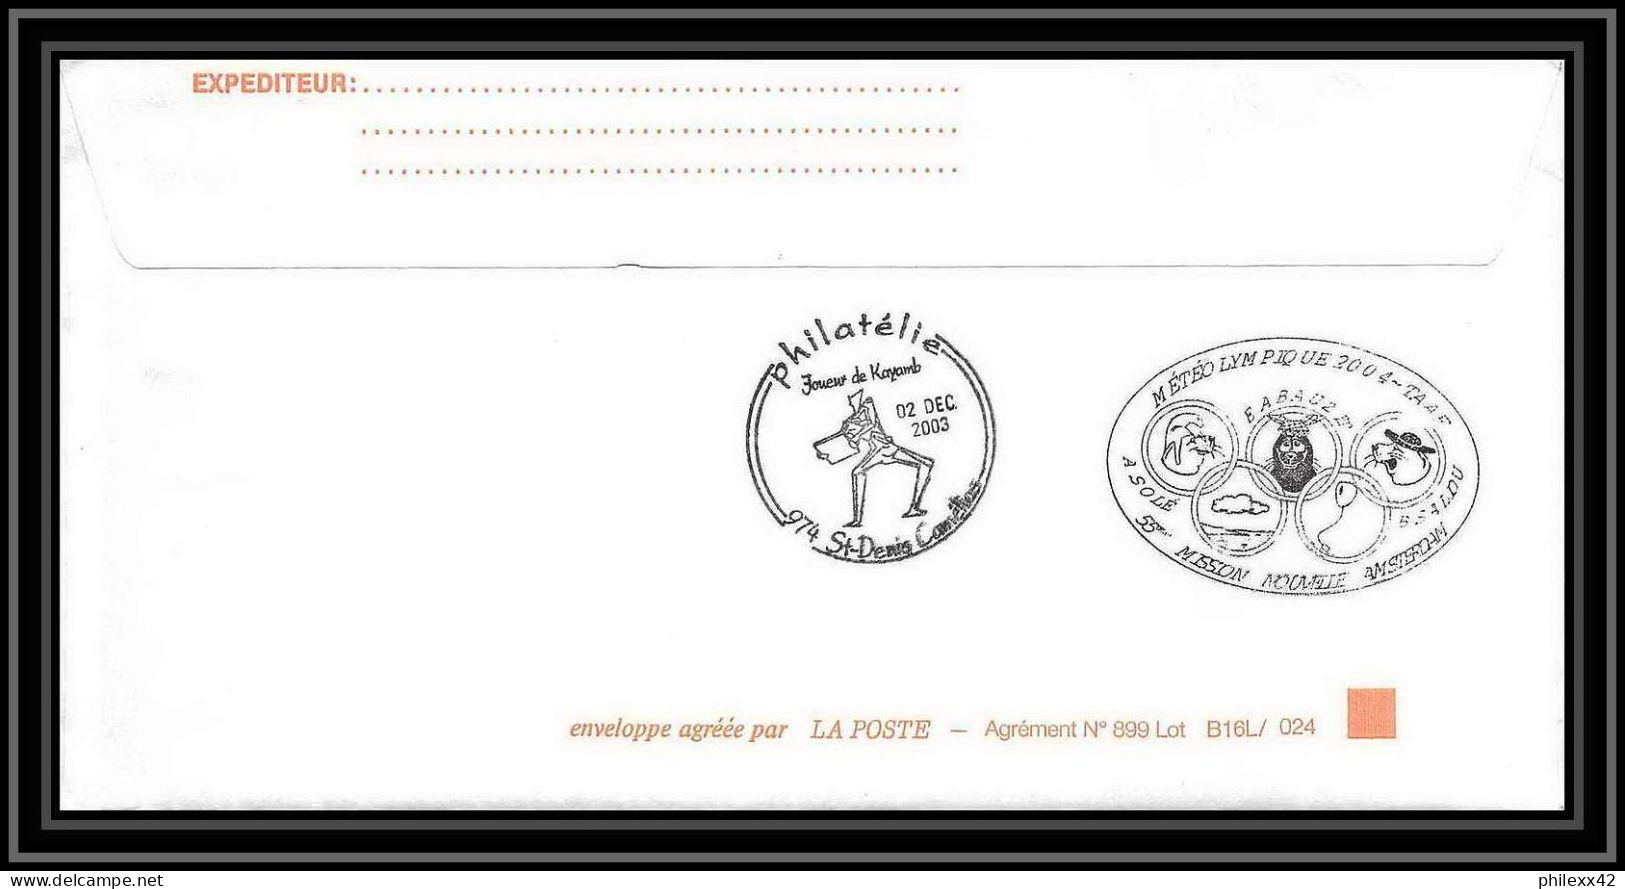 2422 Dufresne 2 Signé Signed Op 2003/4 21/12/2003 N°354 ANTARCTIC Terres Australes (taaf) Lettre Cover - Antarctic Expeditions